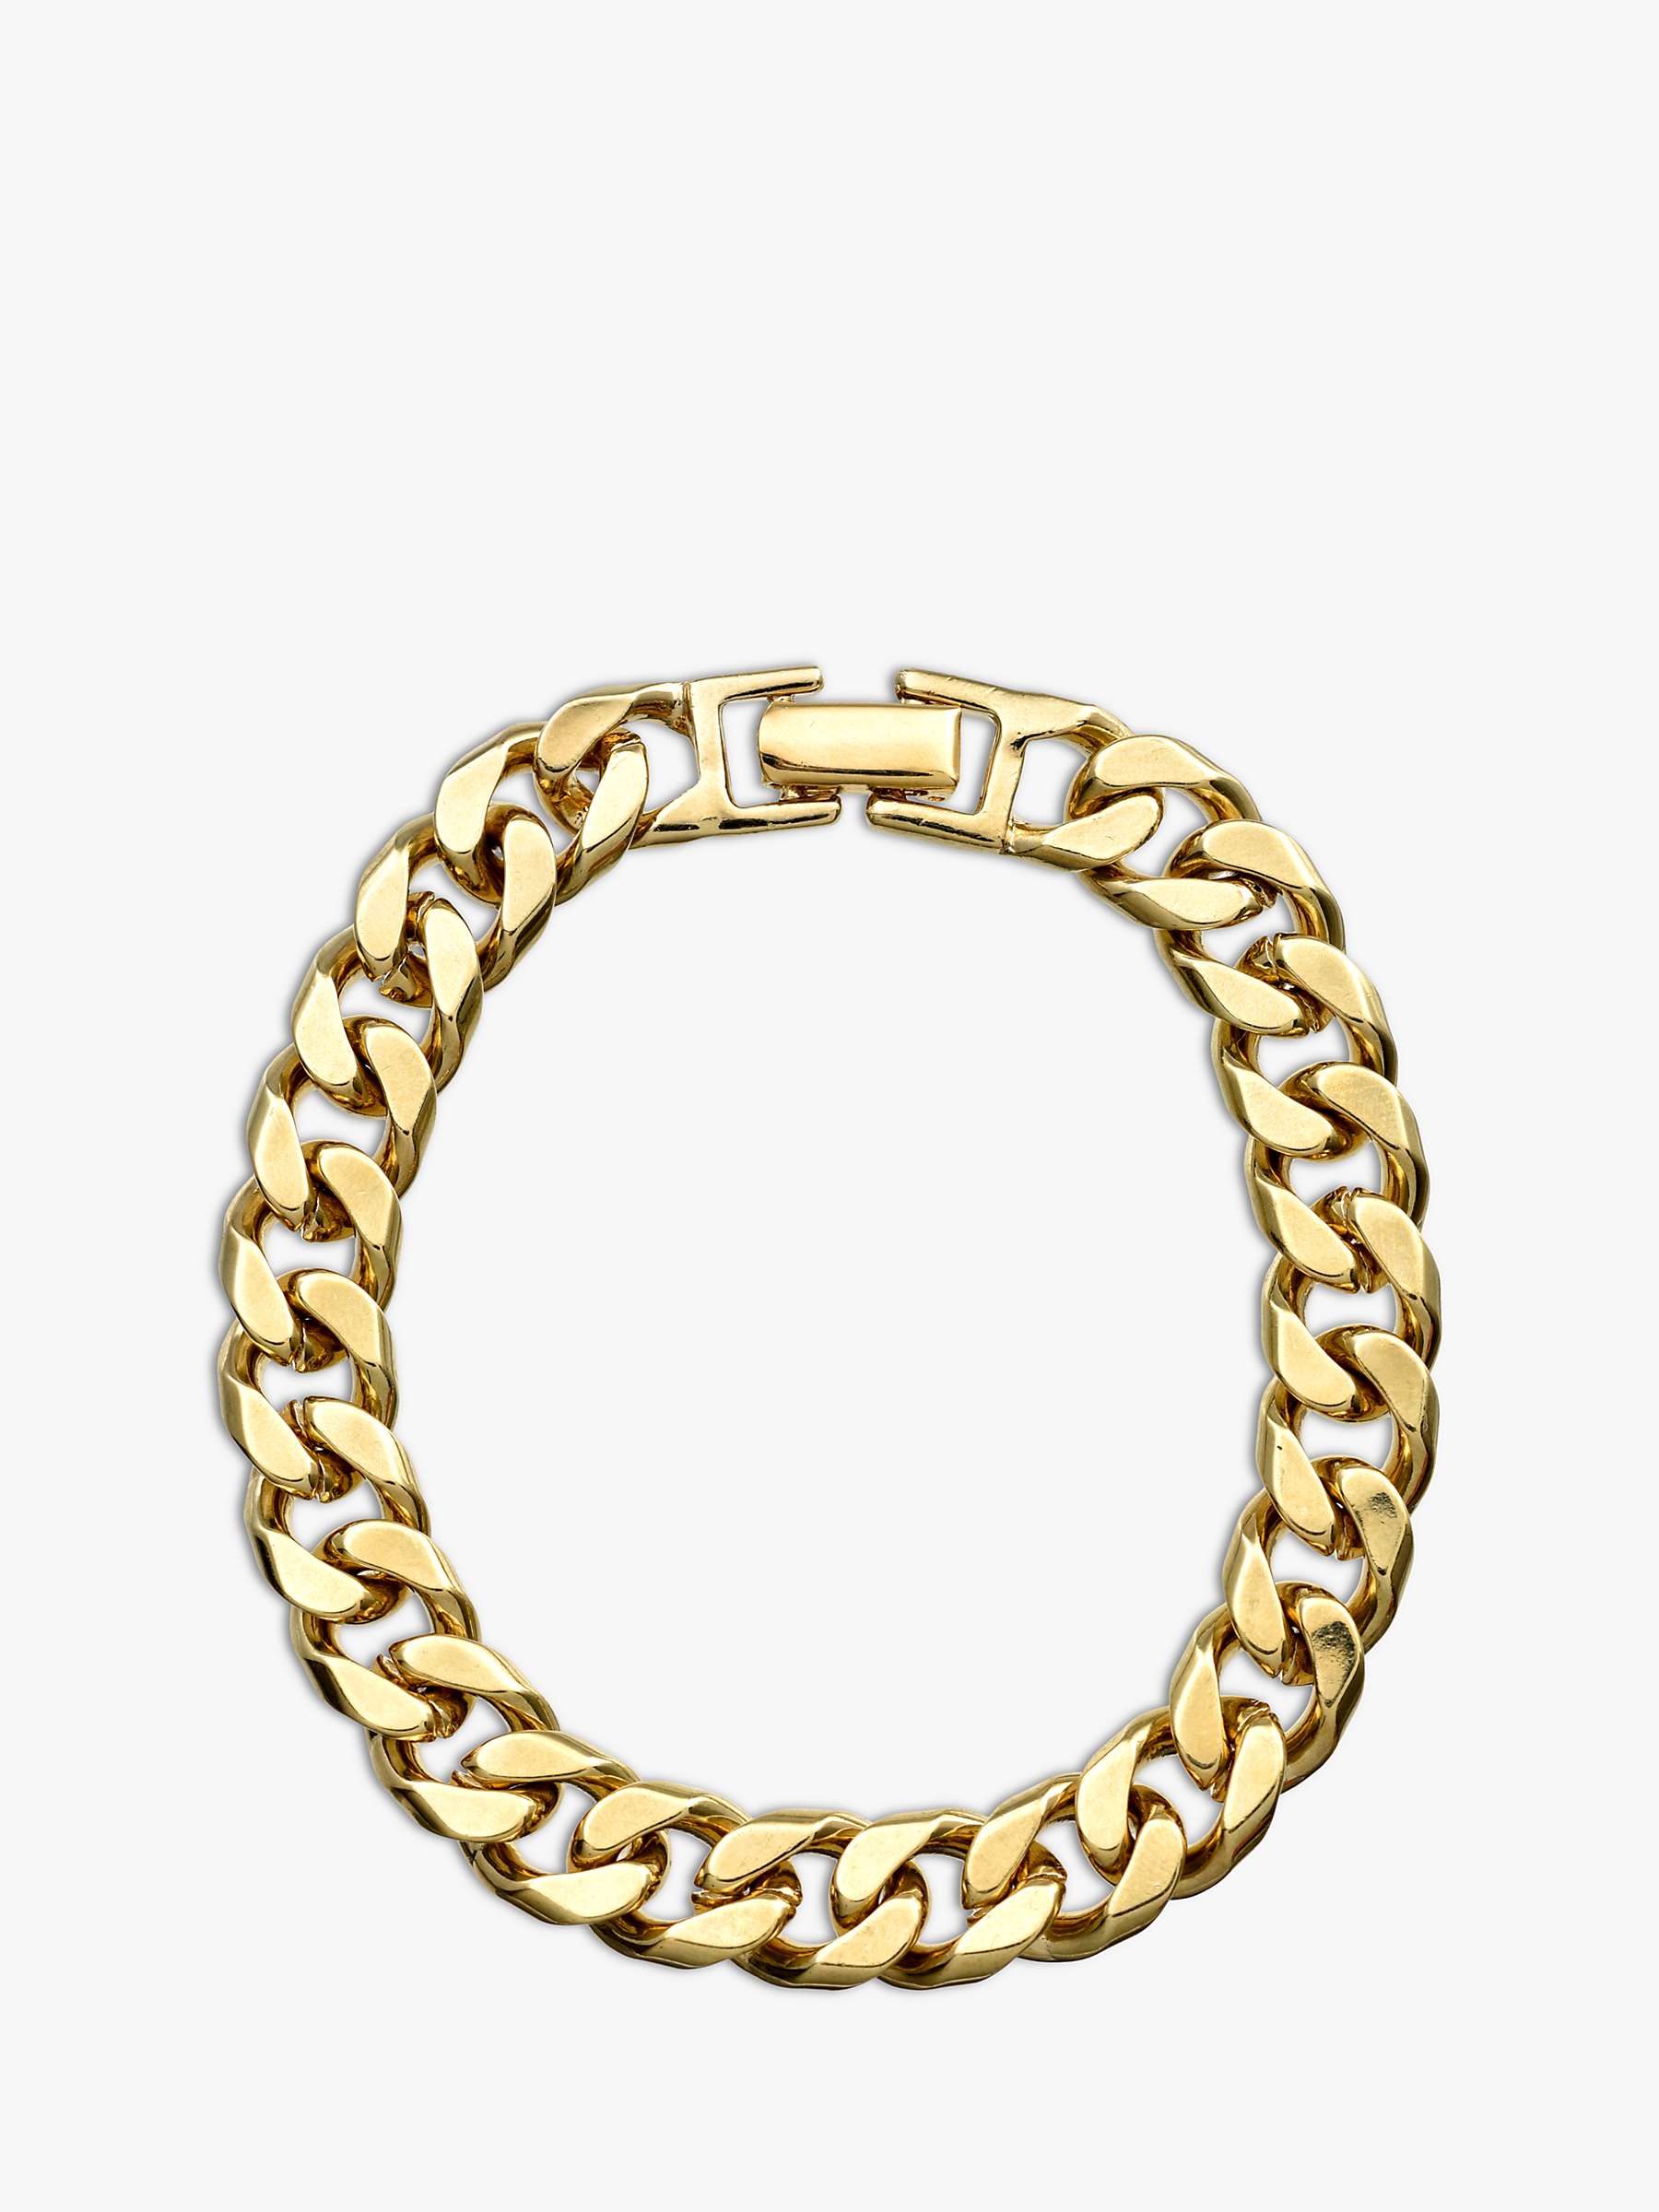 Buy Eclectica Vintage Cabouchon 18ct Gold Plated Curb Link Bracelet, Dated Circa 1980s, Gold Online at johnlewis.com